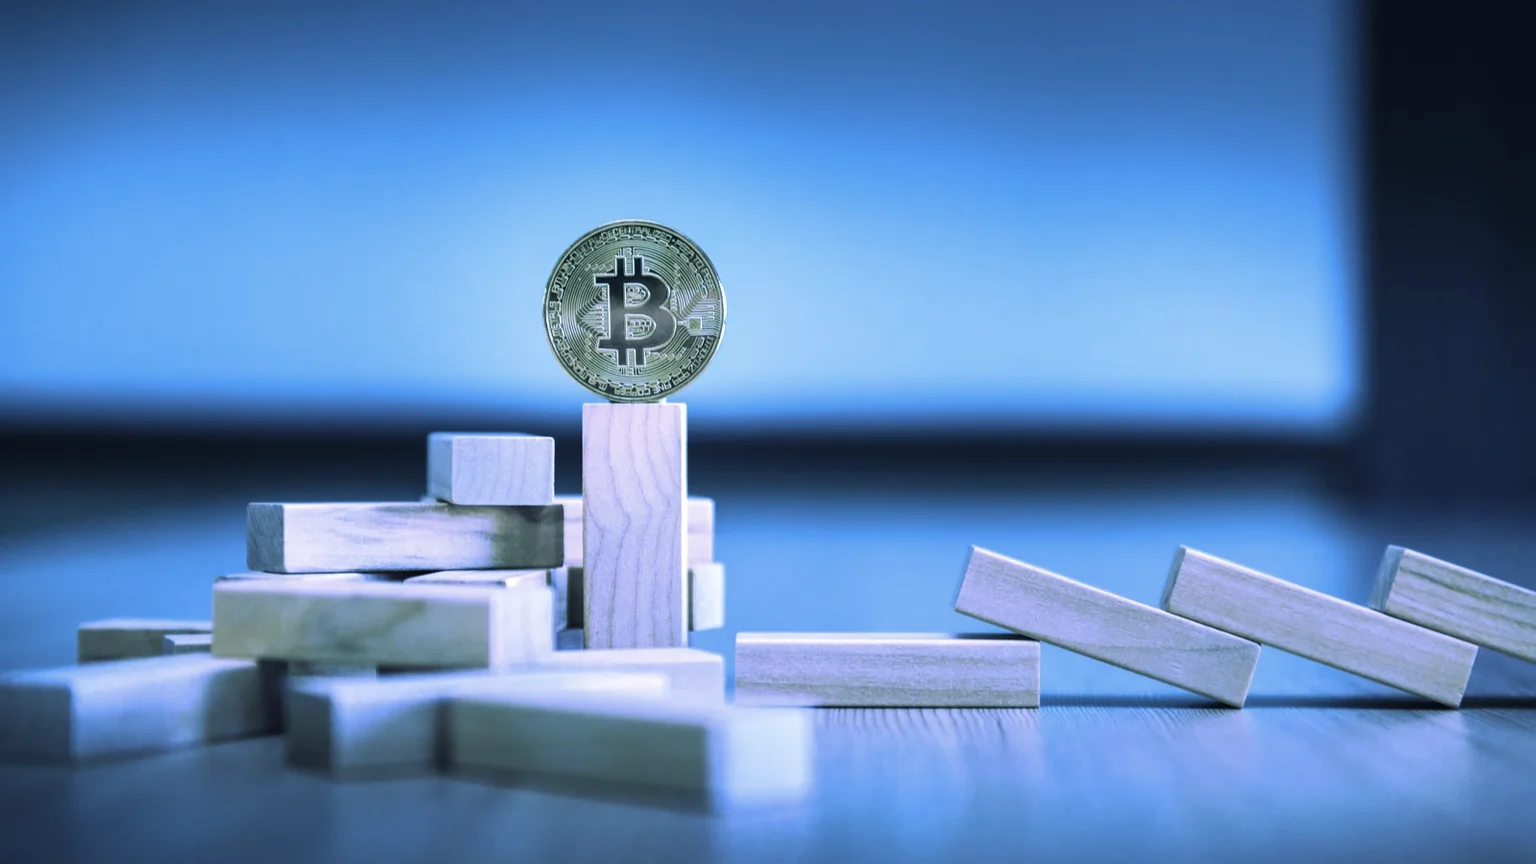 Bitcoin recovers from mid-week crash. Image: Shutterstock